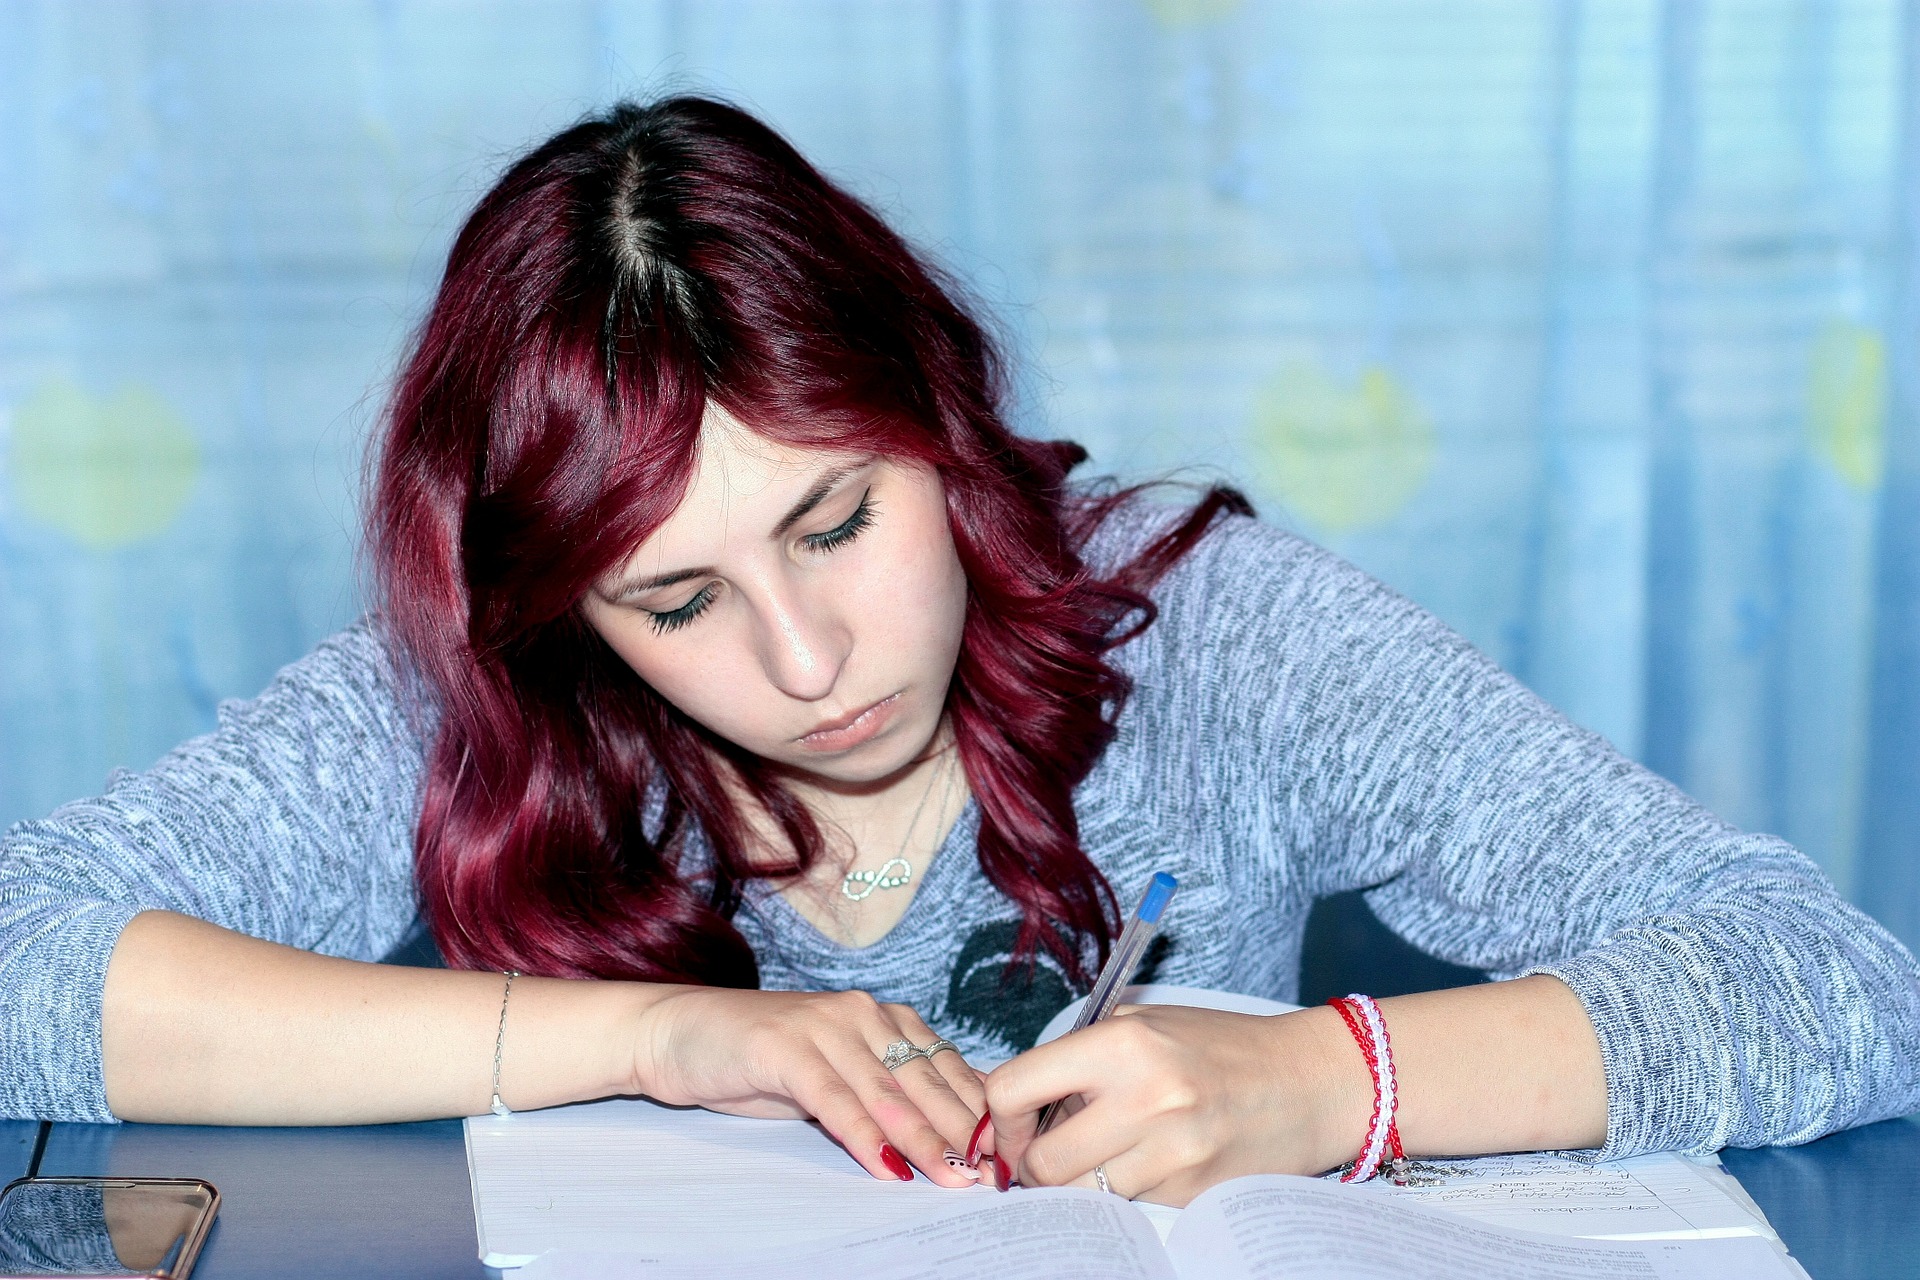 How To Increase Your Brain Power And Concentration Power In Studies?